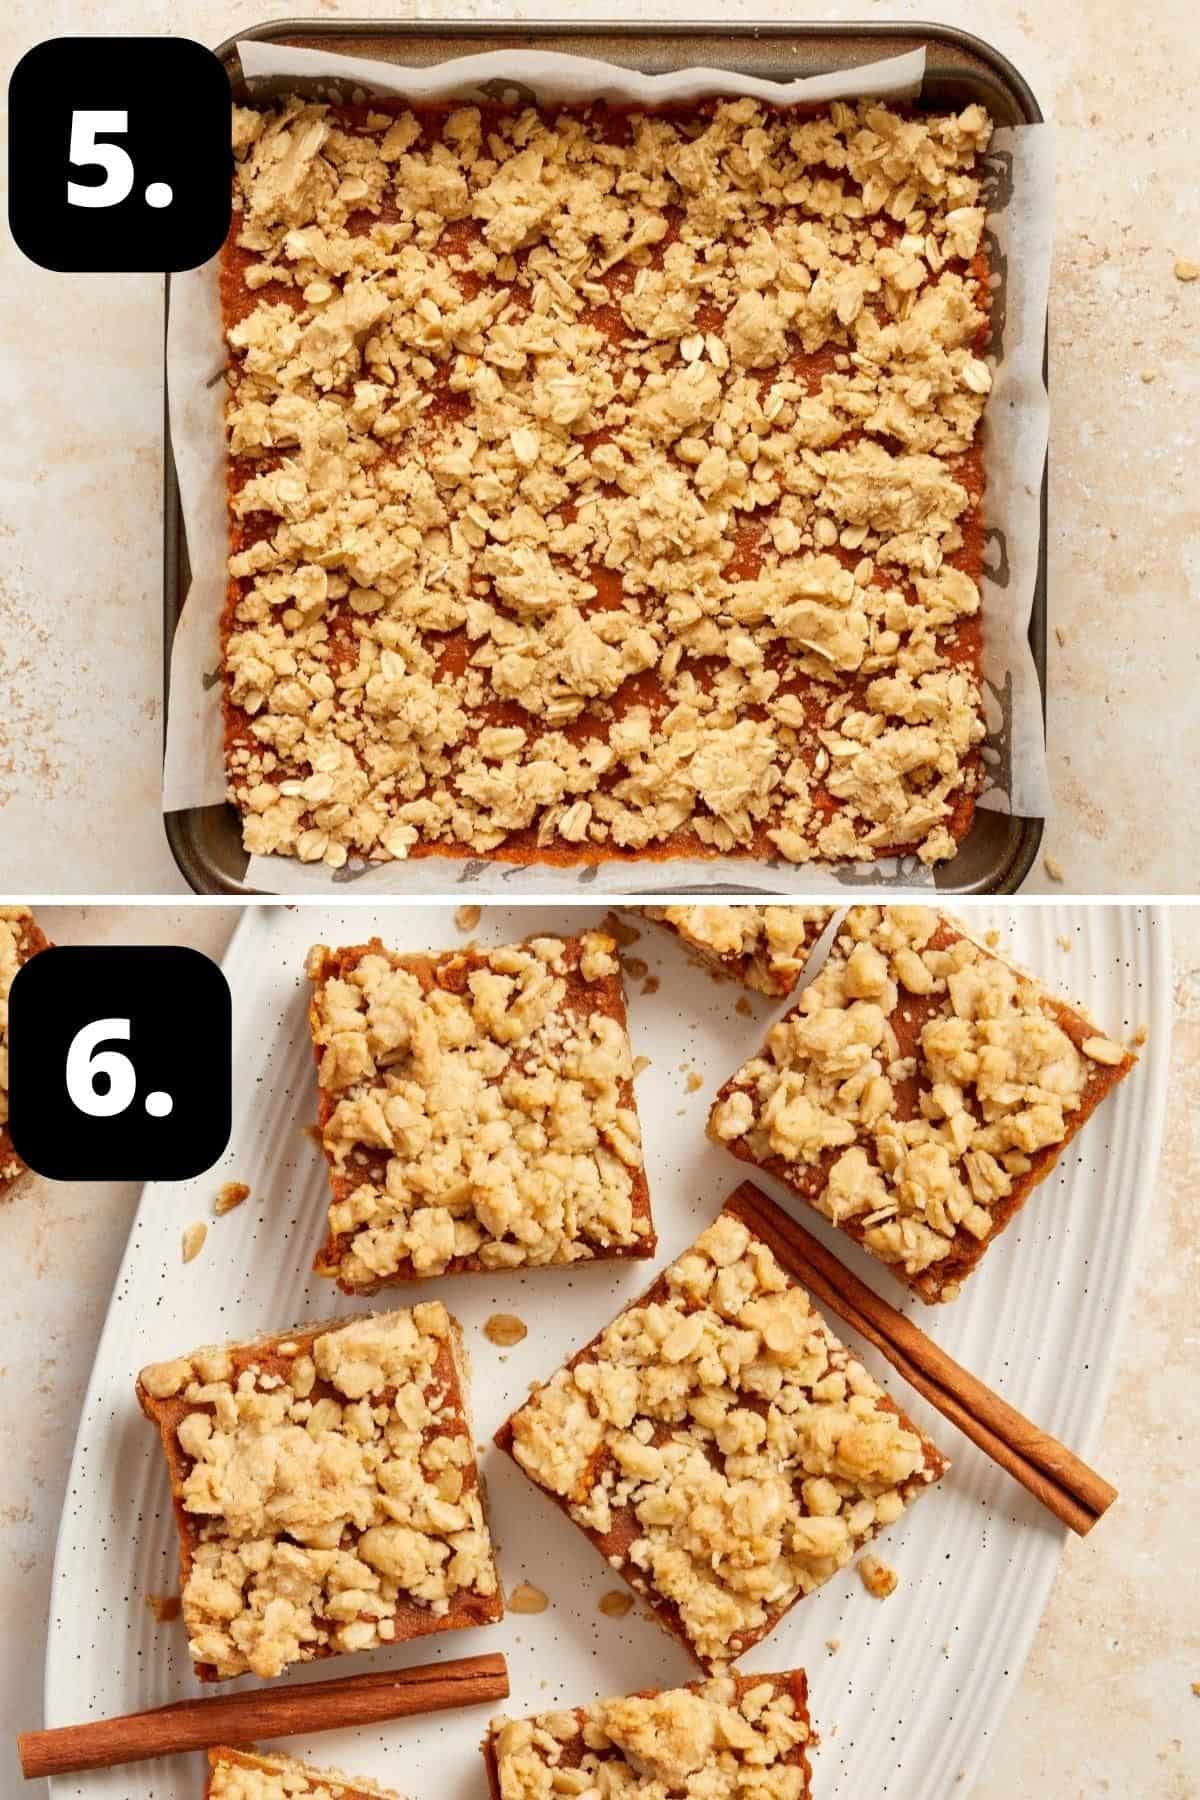 Steps 5-6 of preparing this recipe: the crumble topping on top of the pumpkin base and the cooked and cooled bars cut.